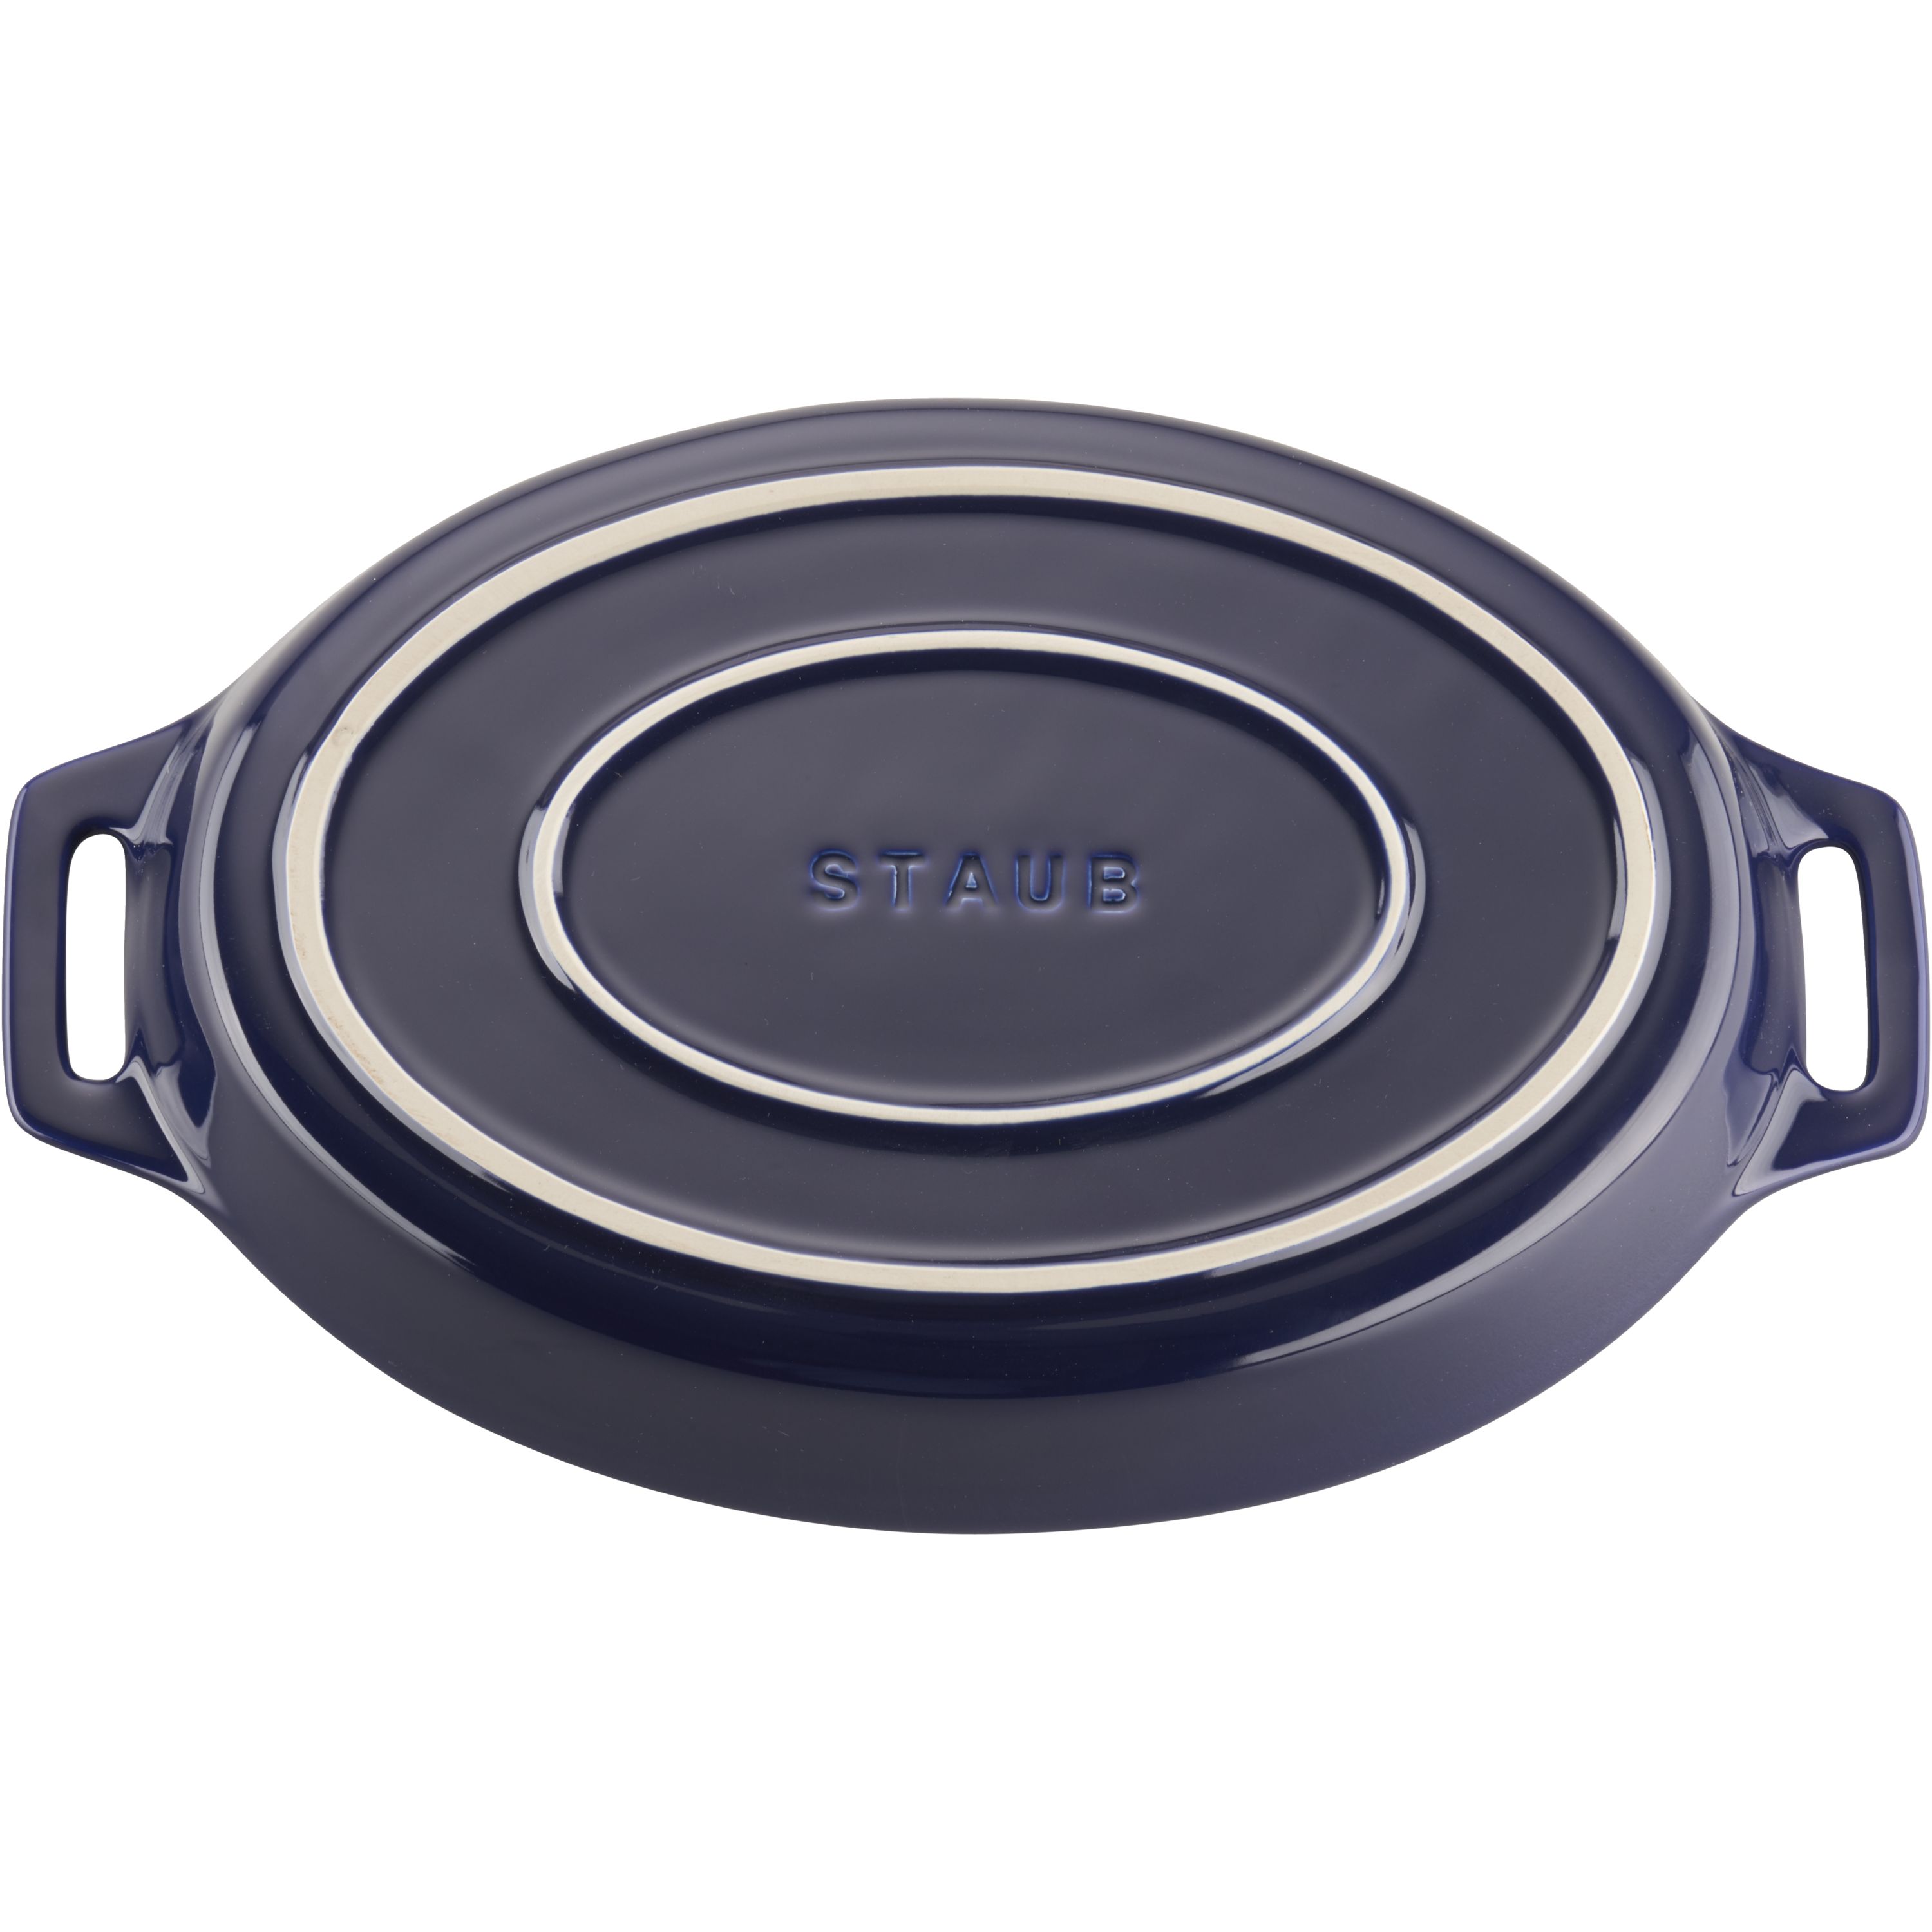 Buy Staub Ceramic - Oval Baking Dishes/ Gratins Special shape